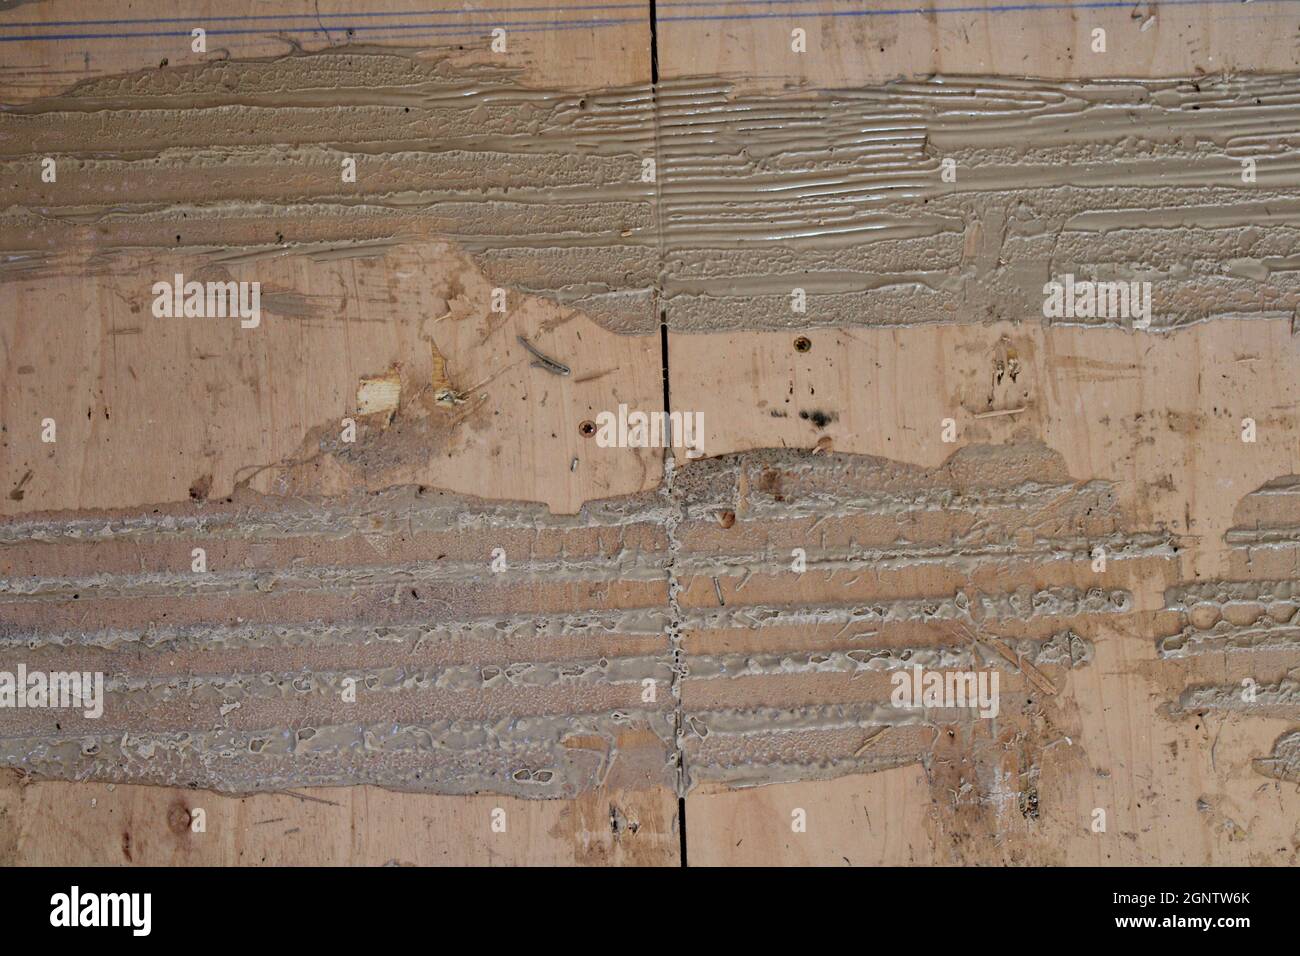 Two Lines of Flooring Glue on a Plywood Subfloor Stock Photo